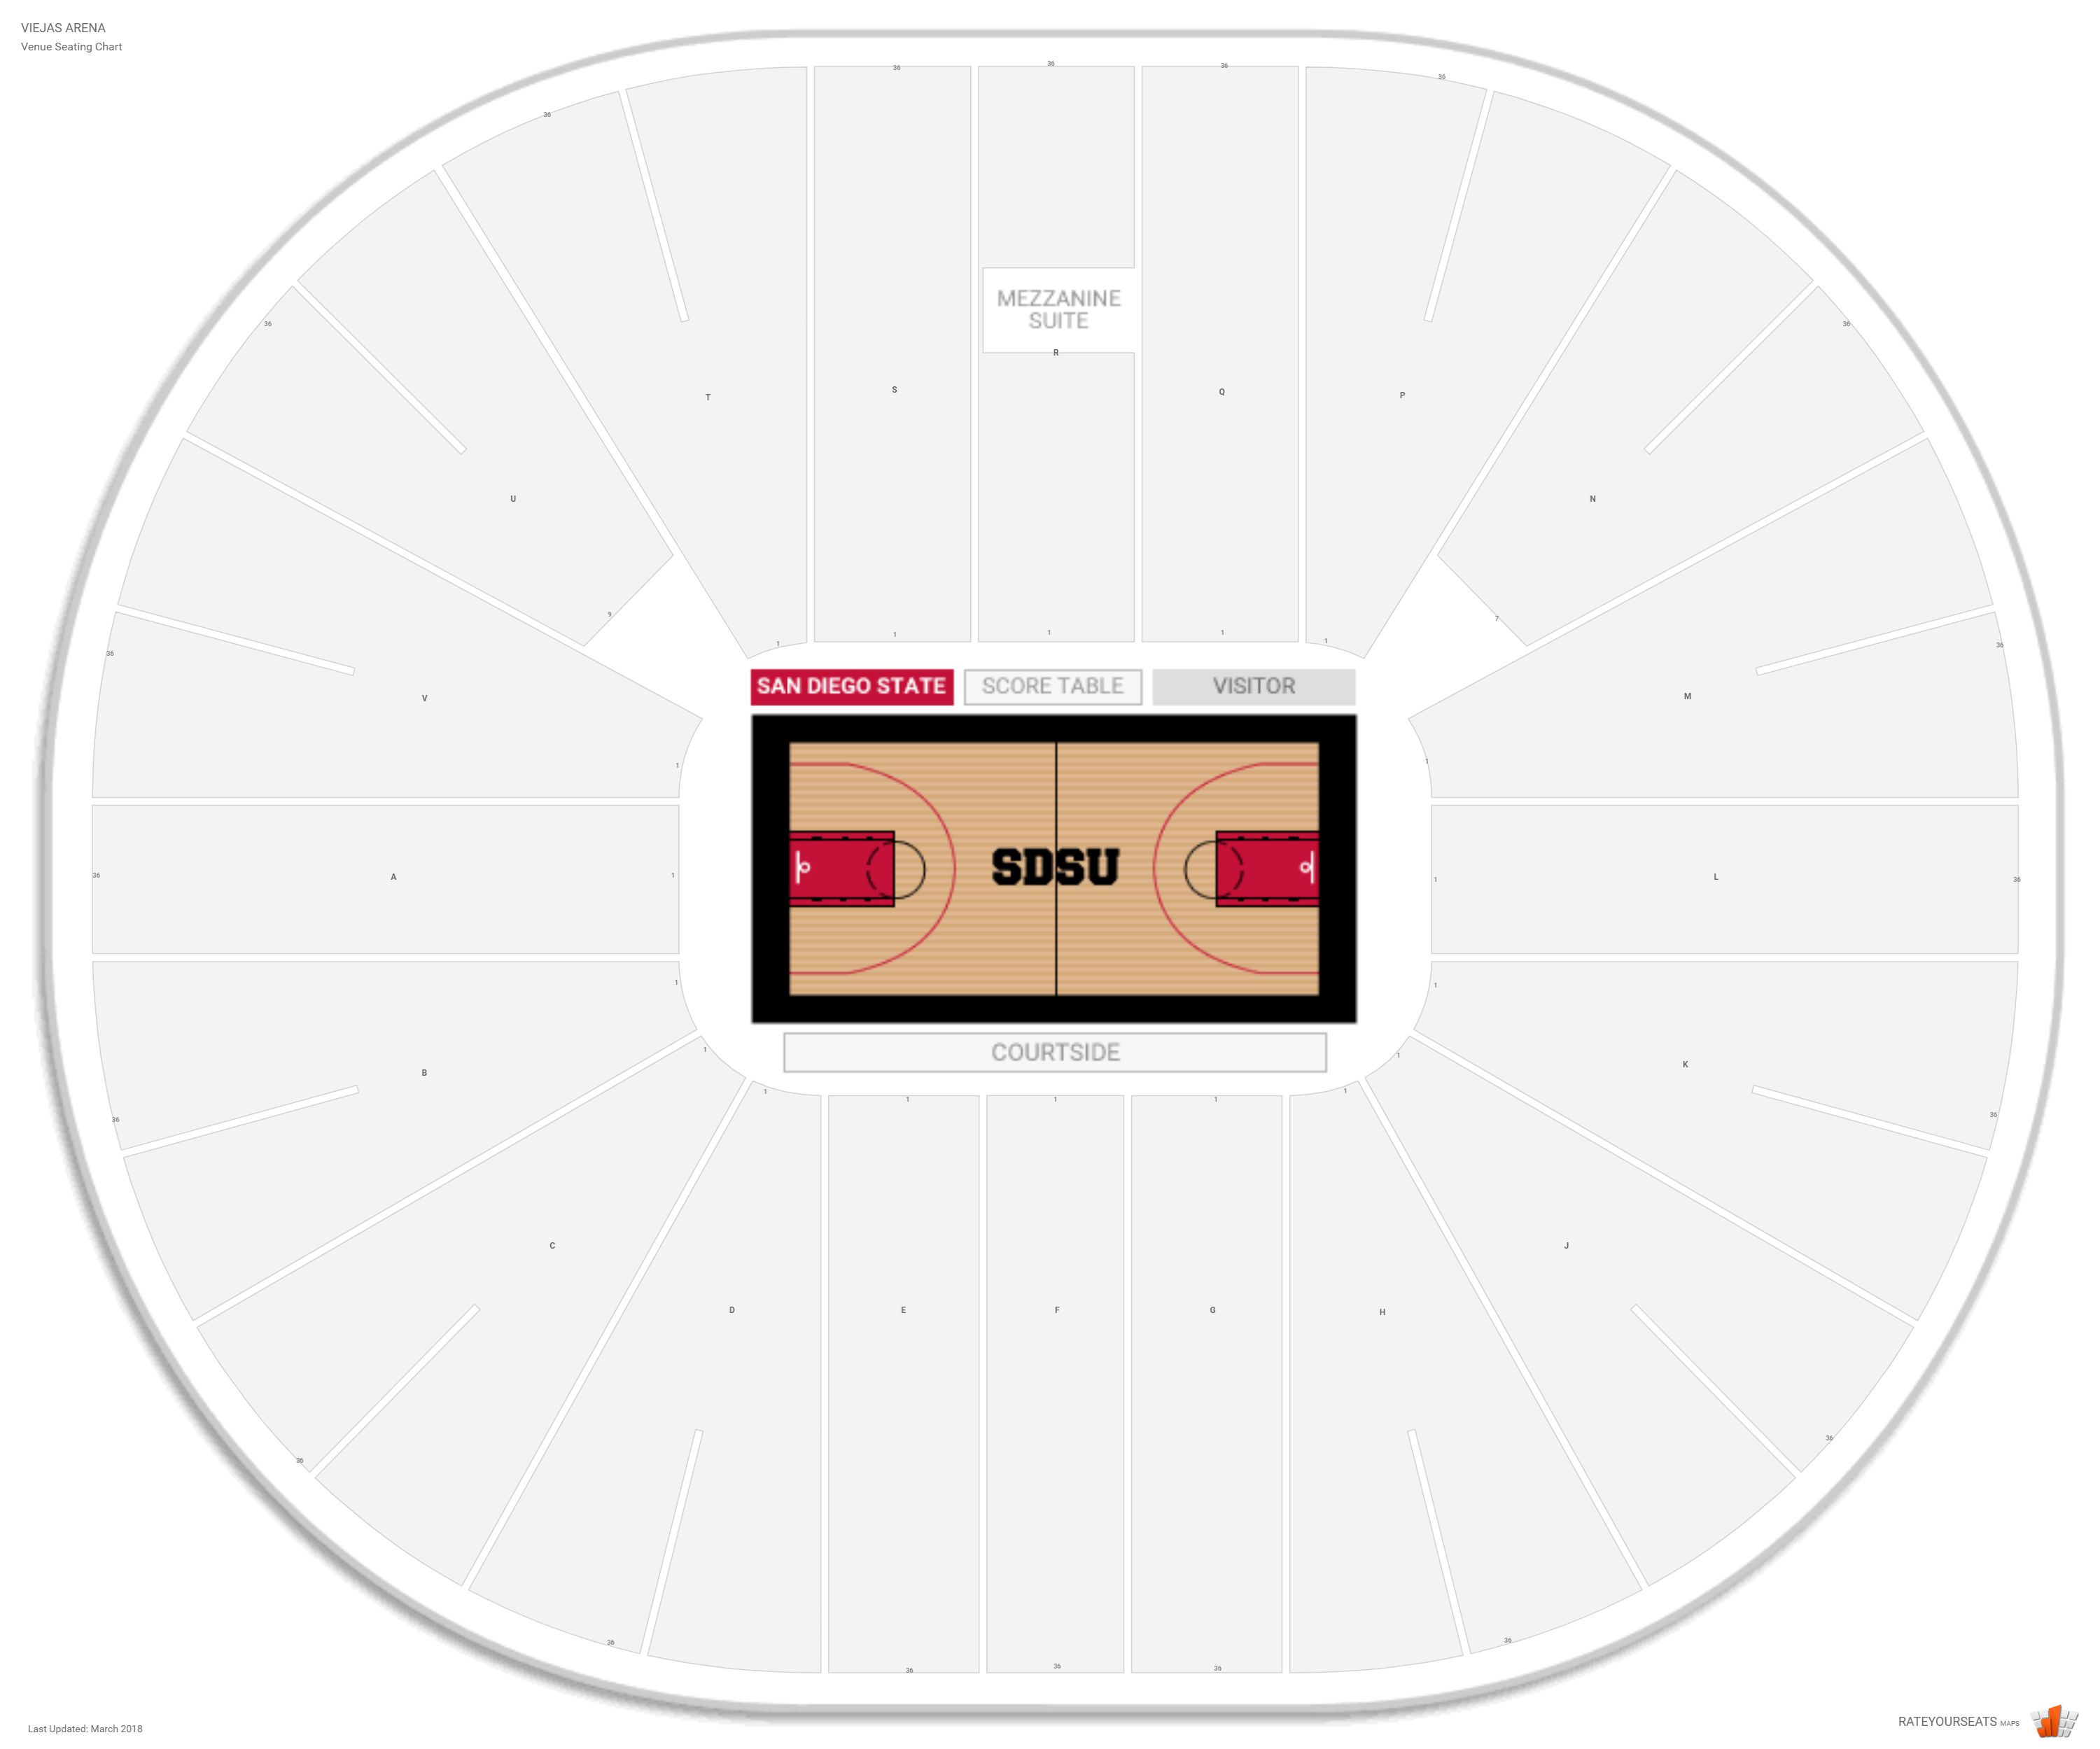 Viejas Casino Concert Seating Chart